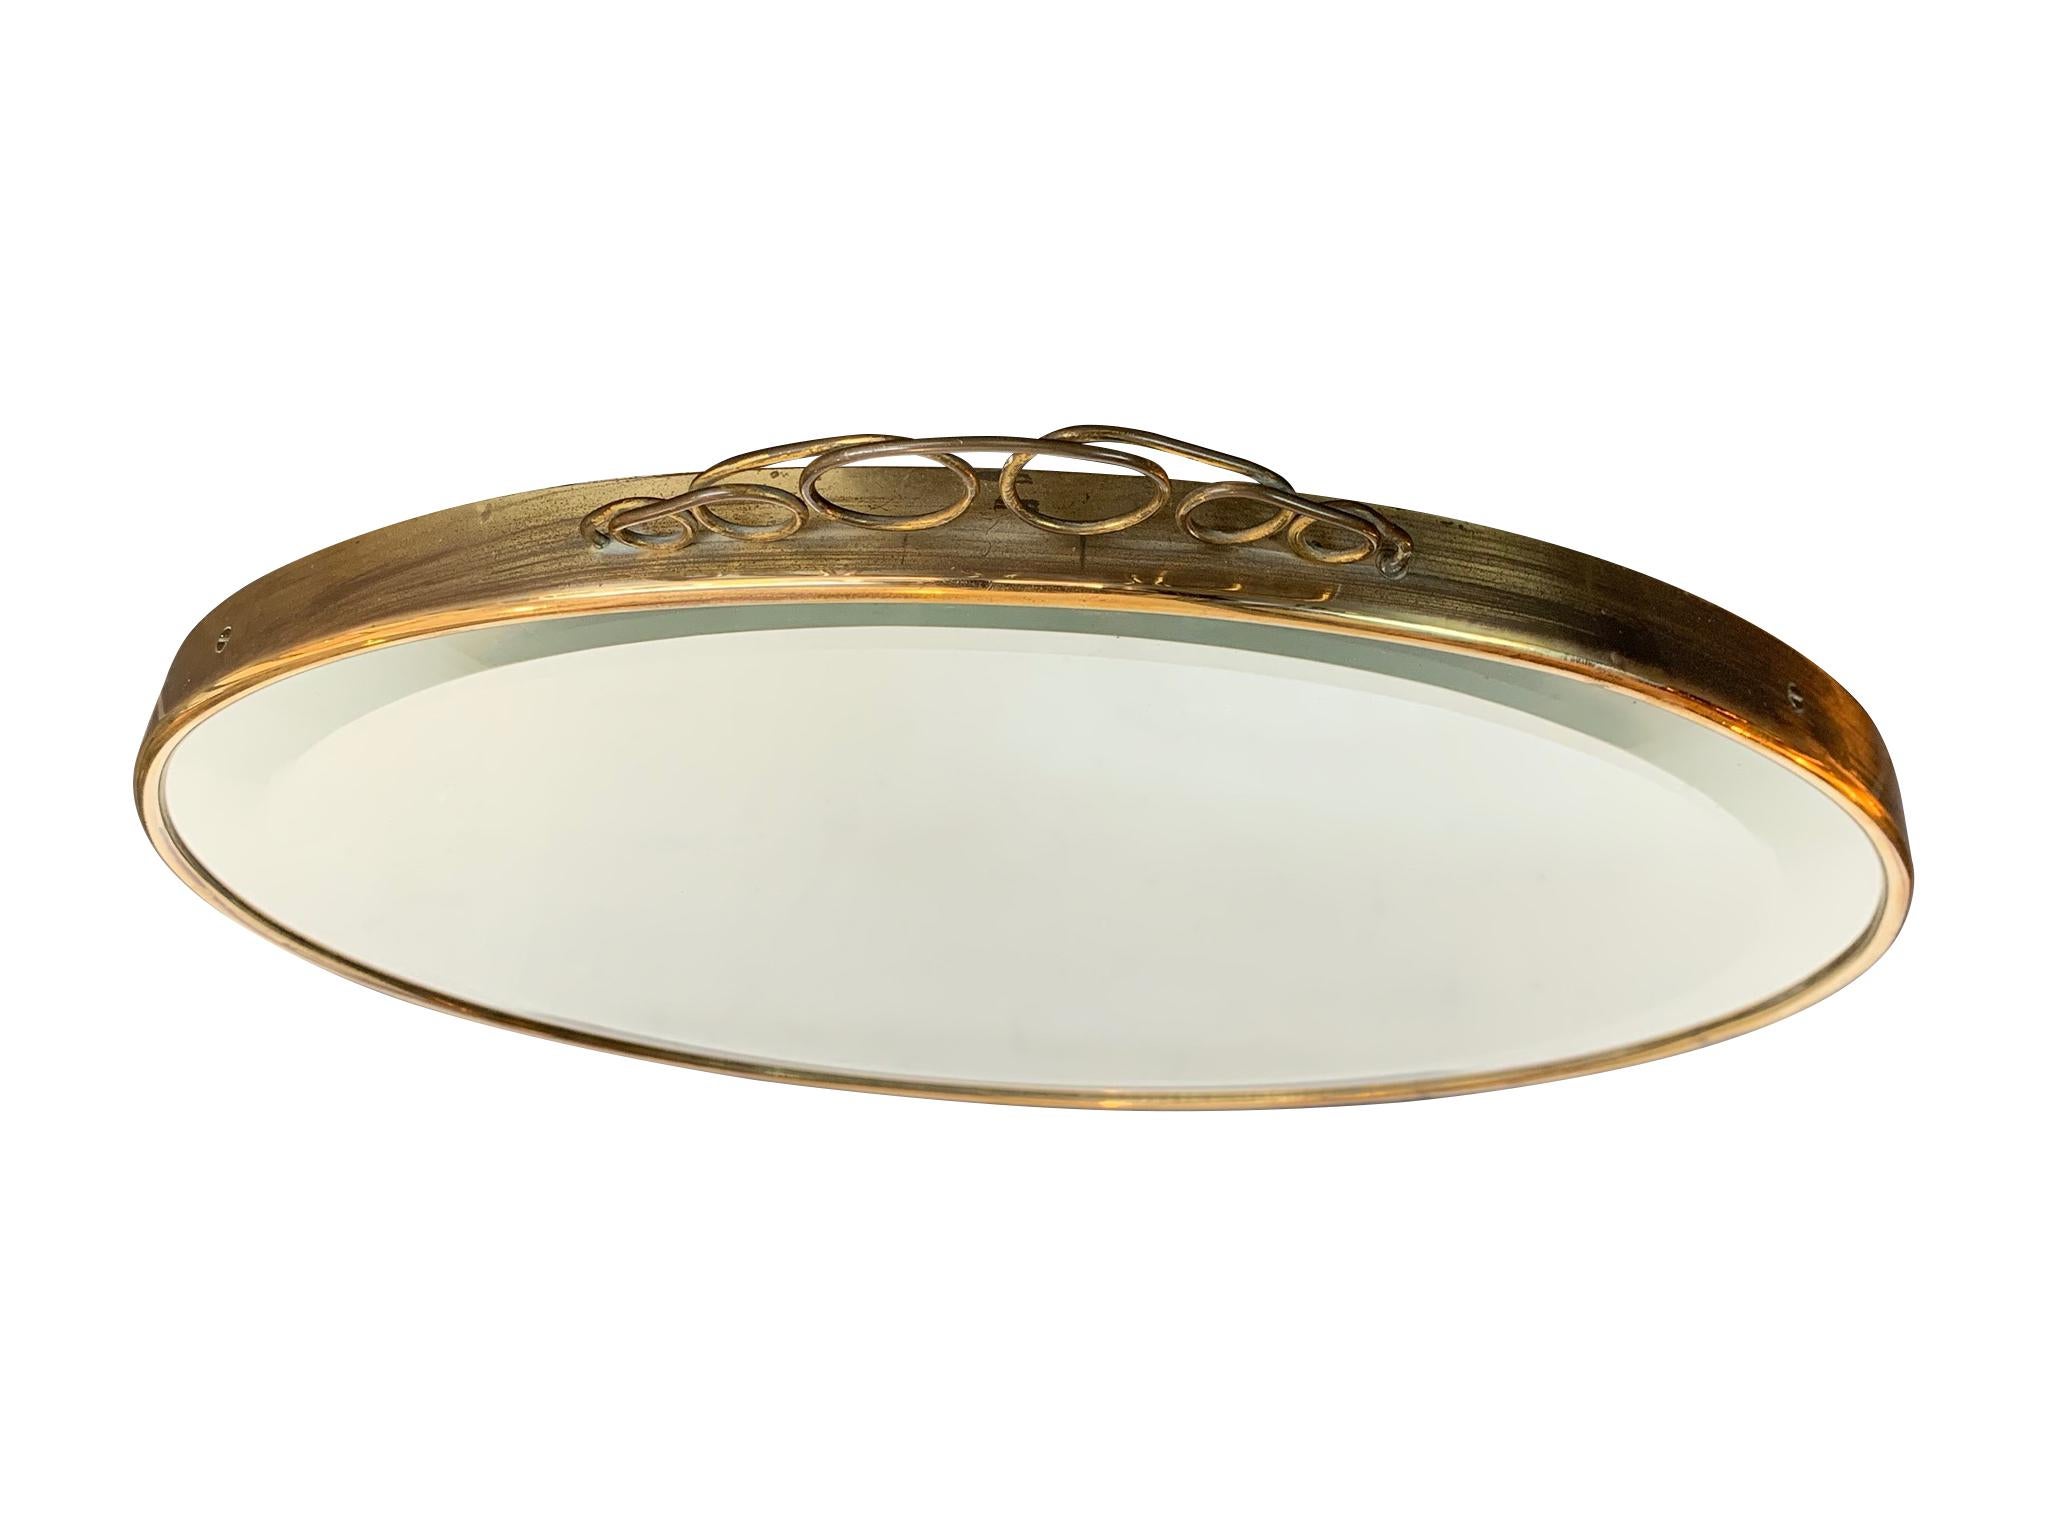 Mid-20th Century 1950s Italian Circular Mirror with Bevelled Glass, Brass Frame and Top Detail